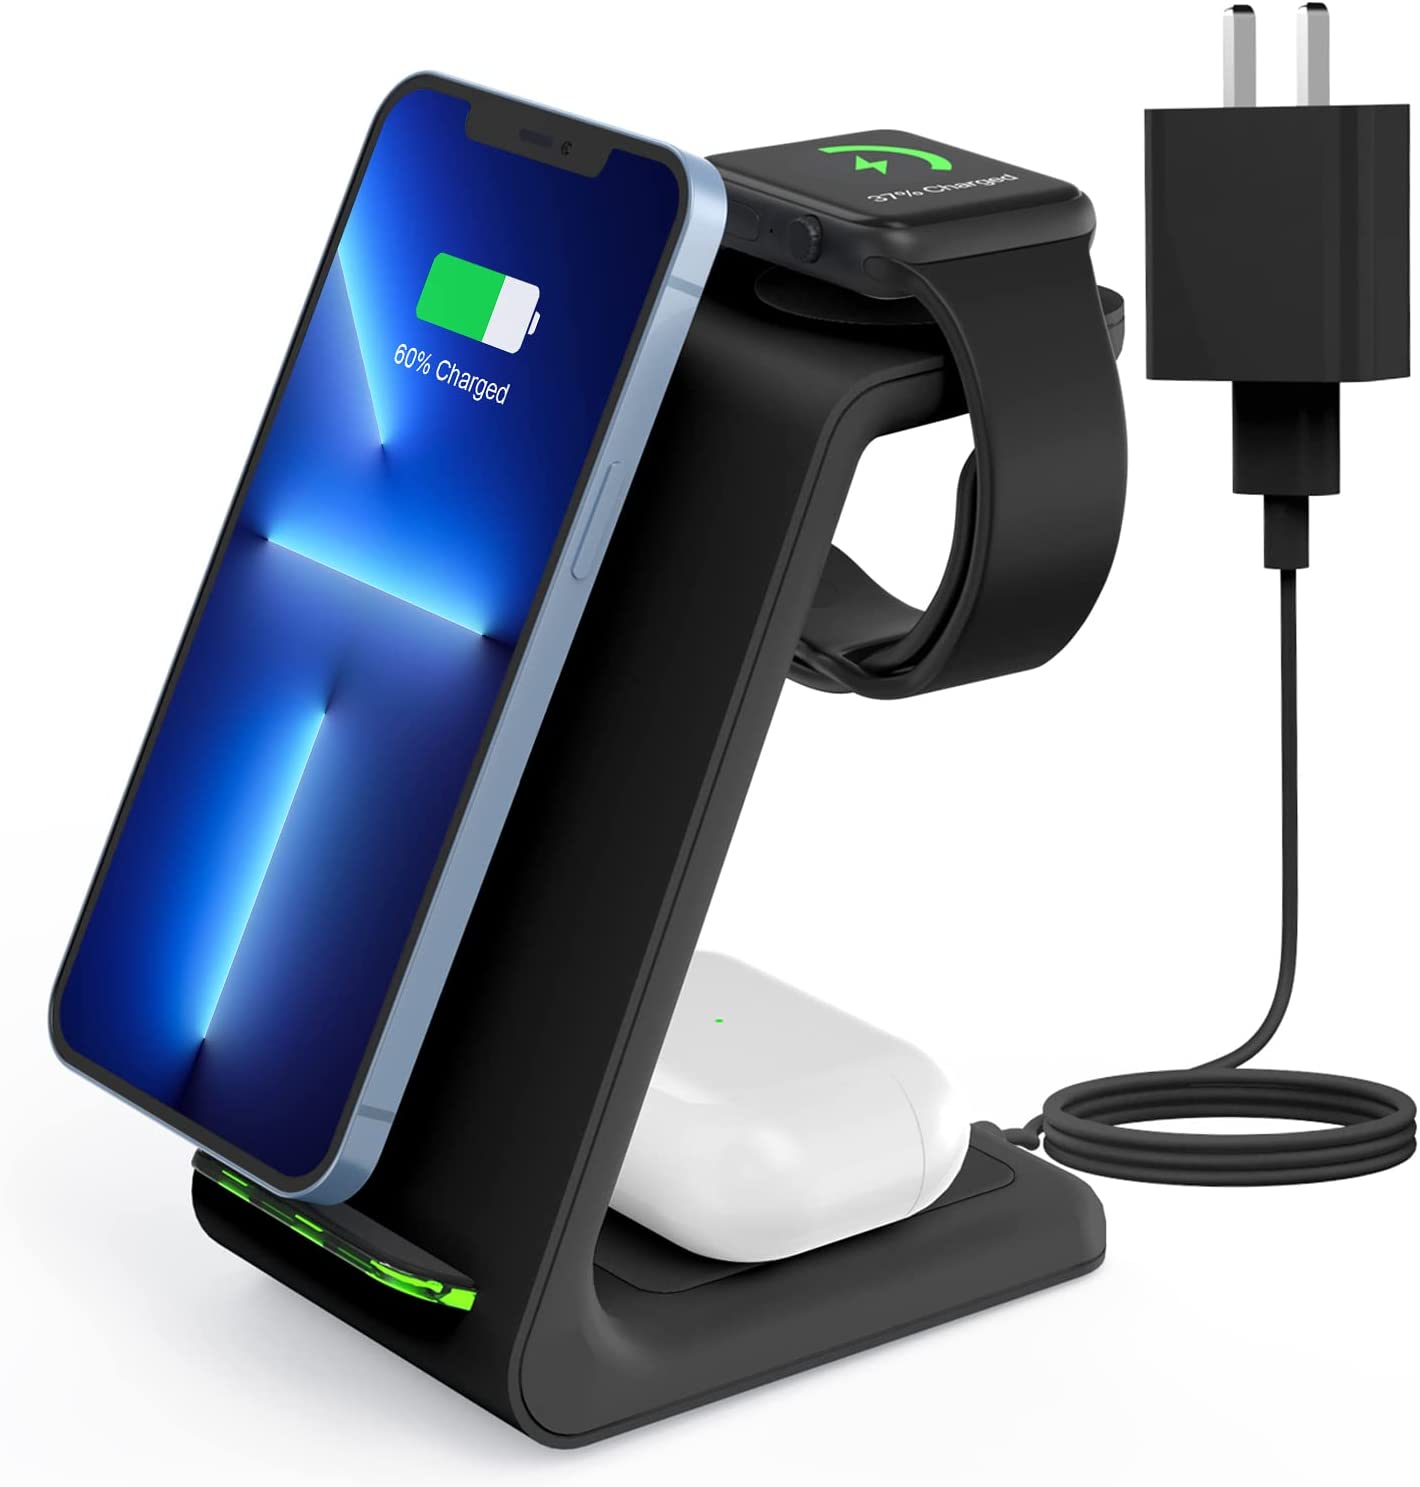 3 in 1 charging dock, one of the best gifts for teen boys